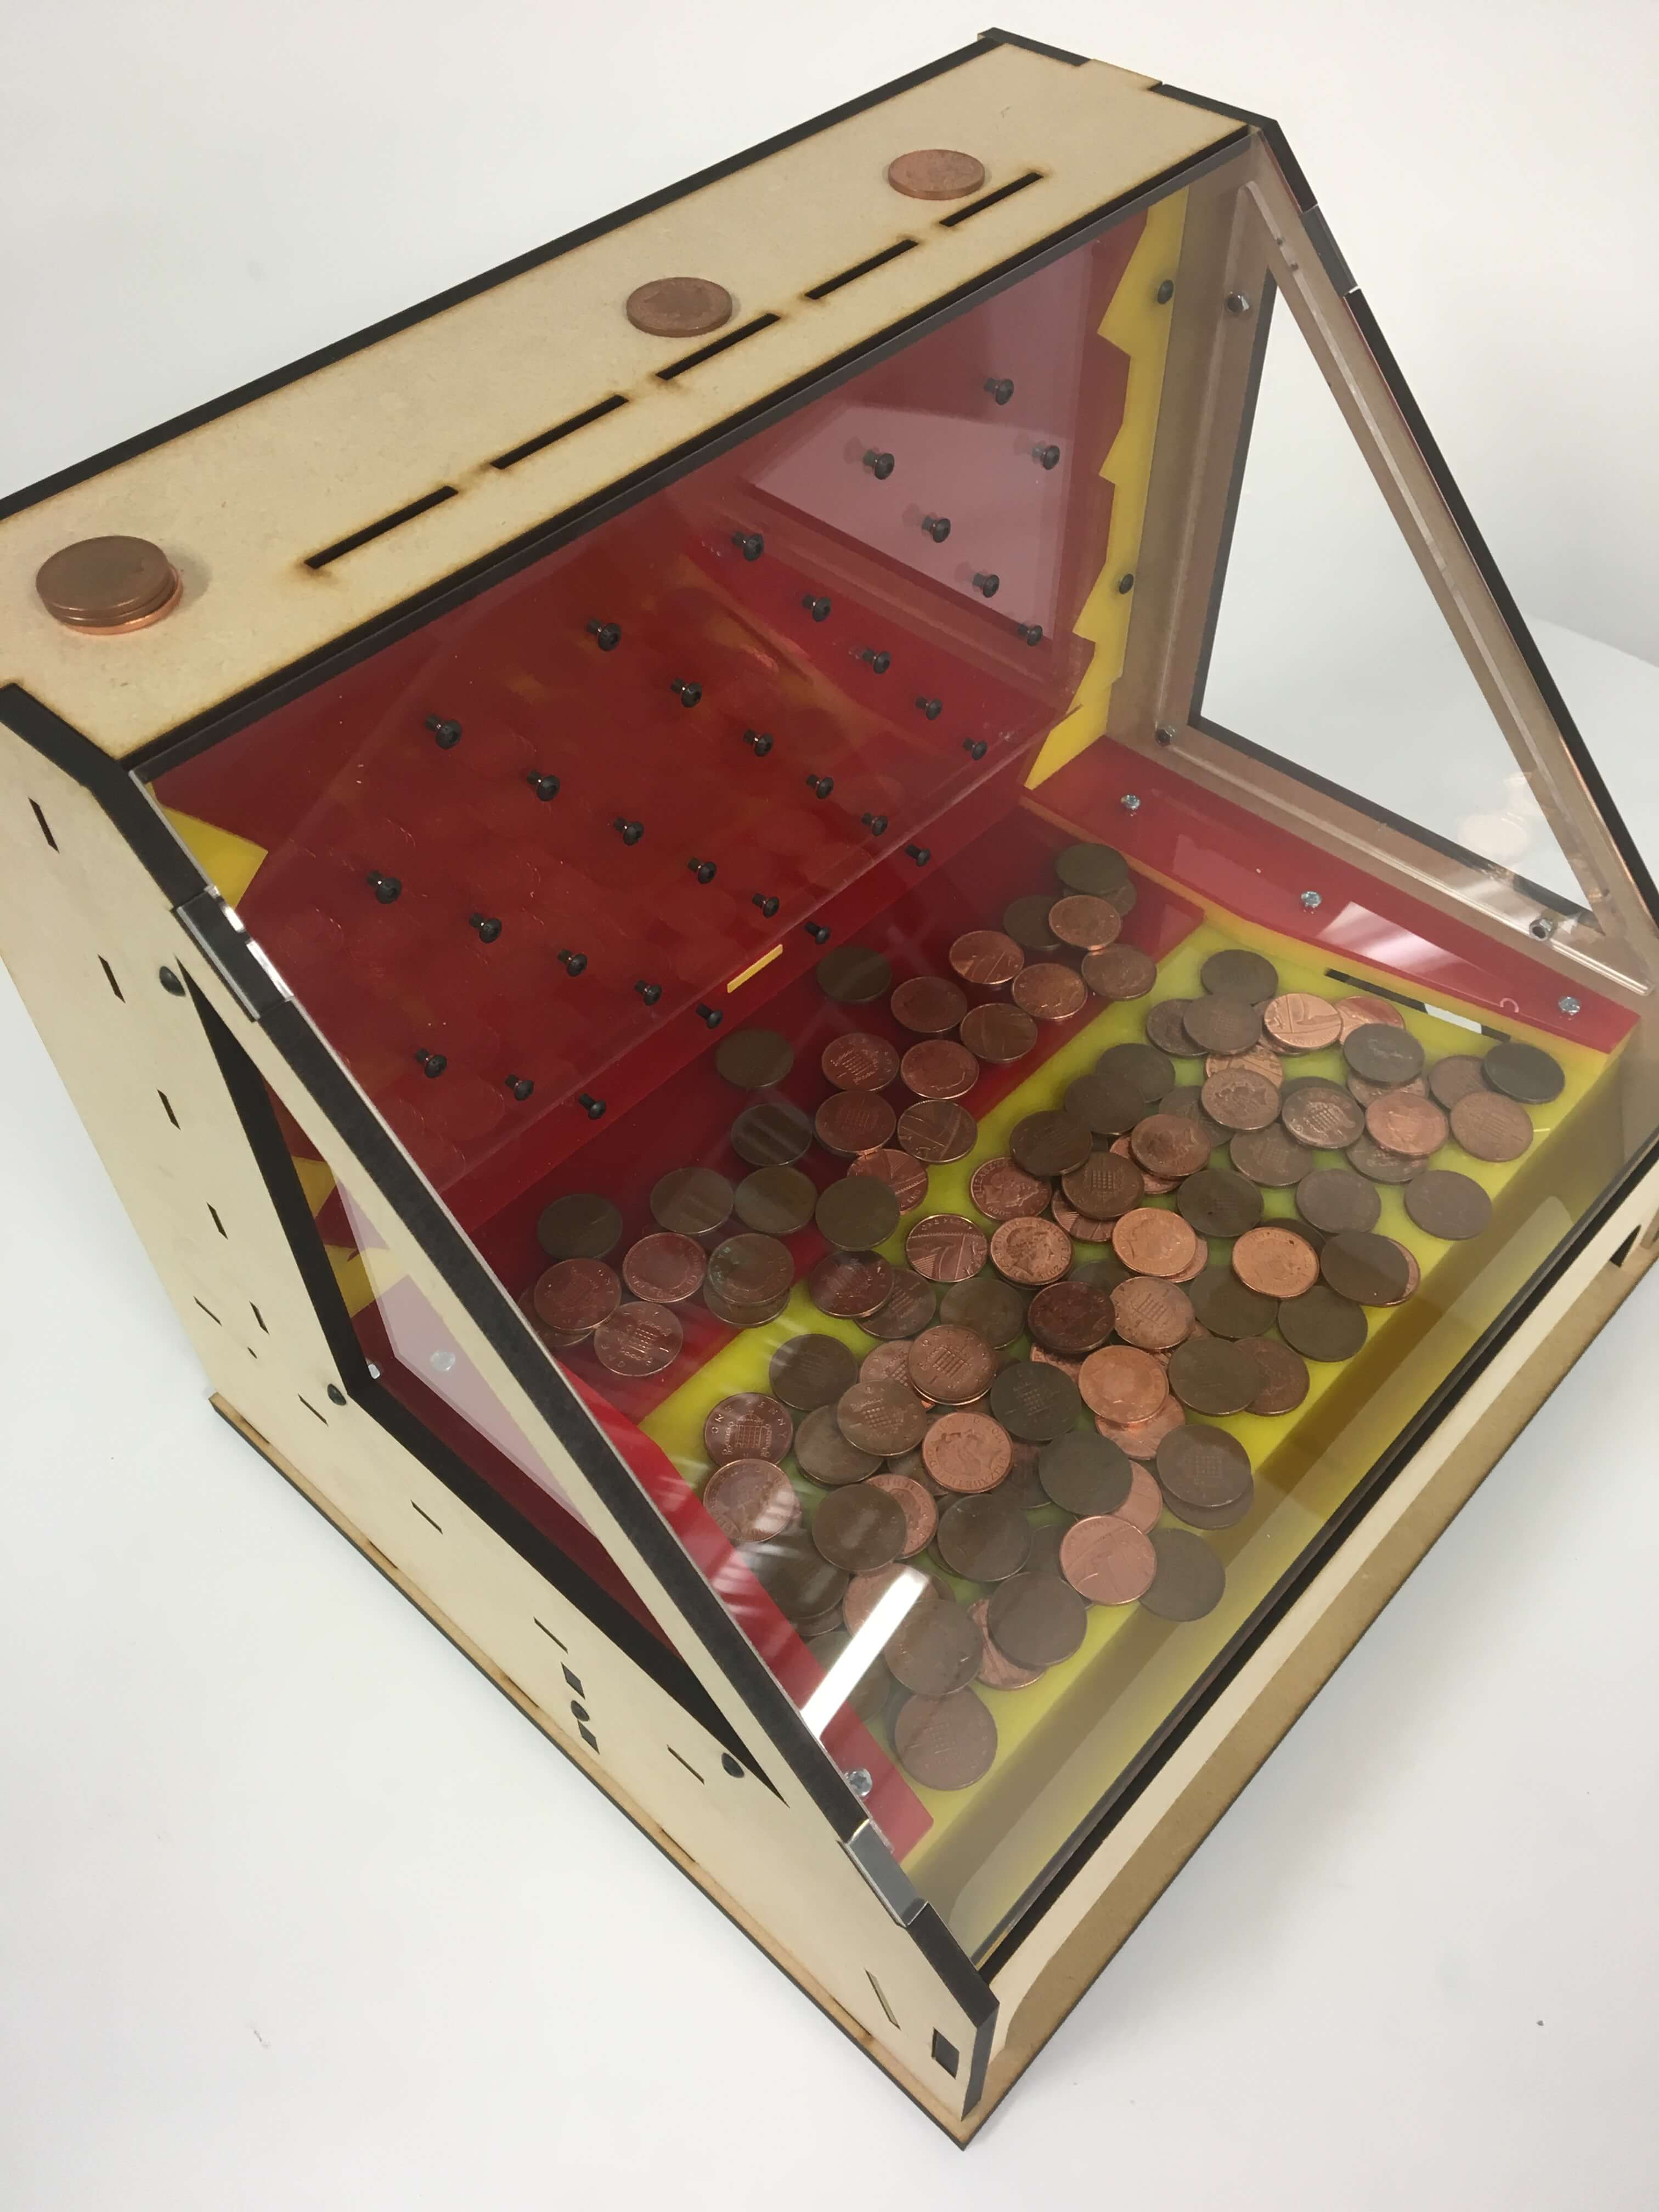 Arcade Coin Pusher game